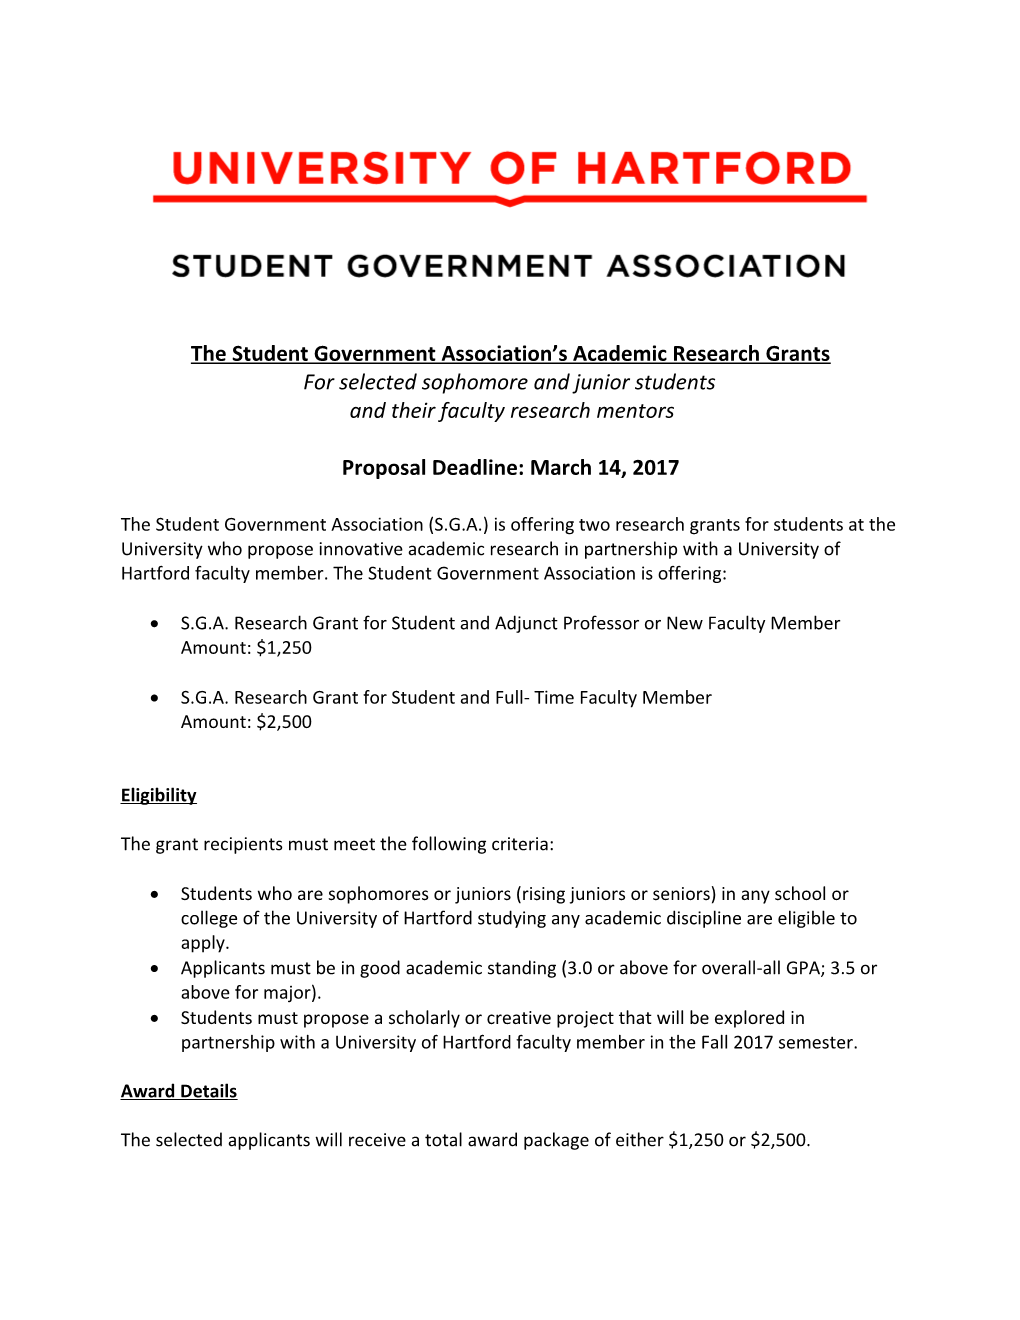 The Student Government Association S Academic Research Grants